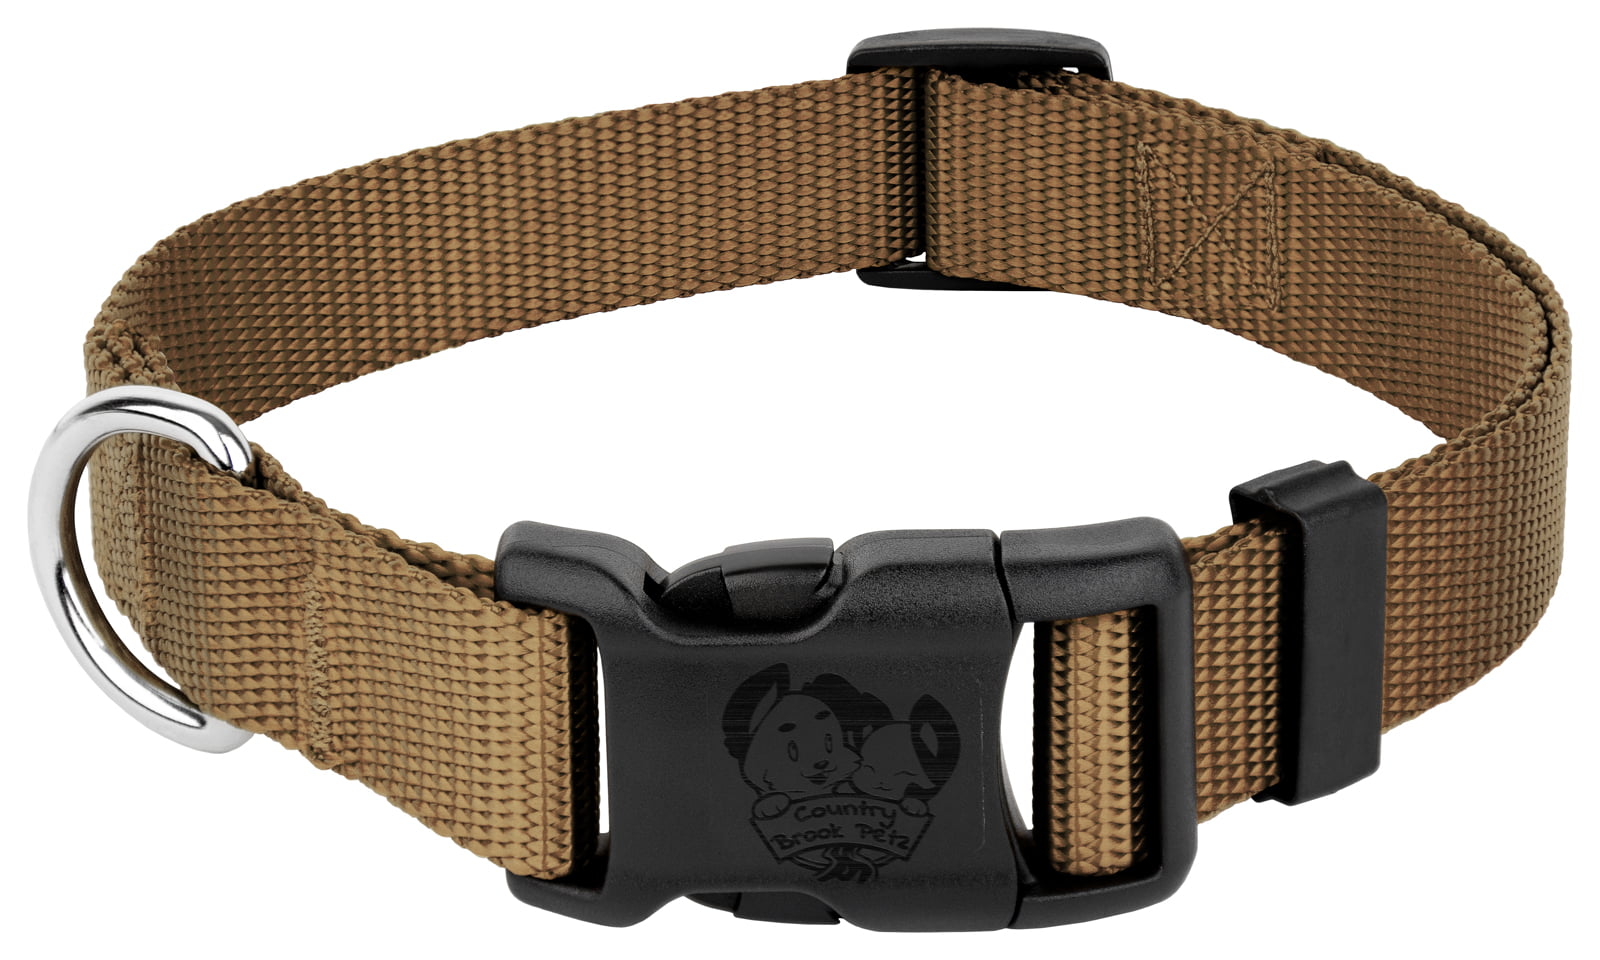 NEW Coyote Spike Nylon Buckle Dog Pet Collar Choose Size and Color 